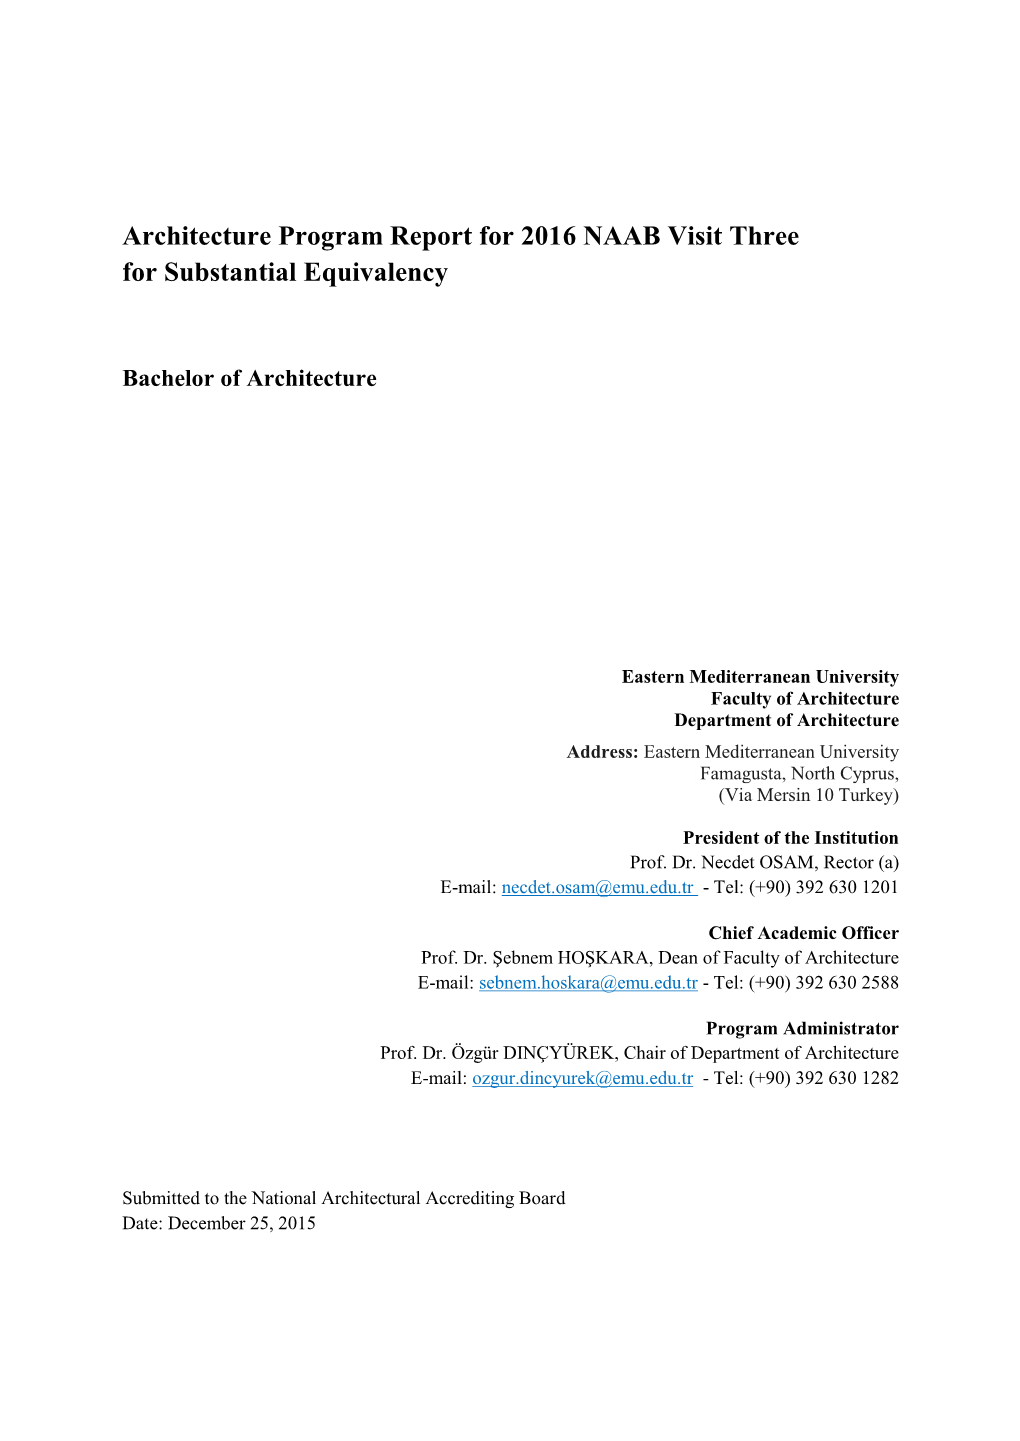 Architecture Program Report for 2016 NAAB Visit Three for Substantial Equivalency